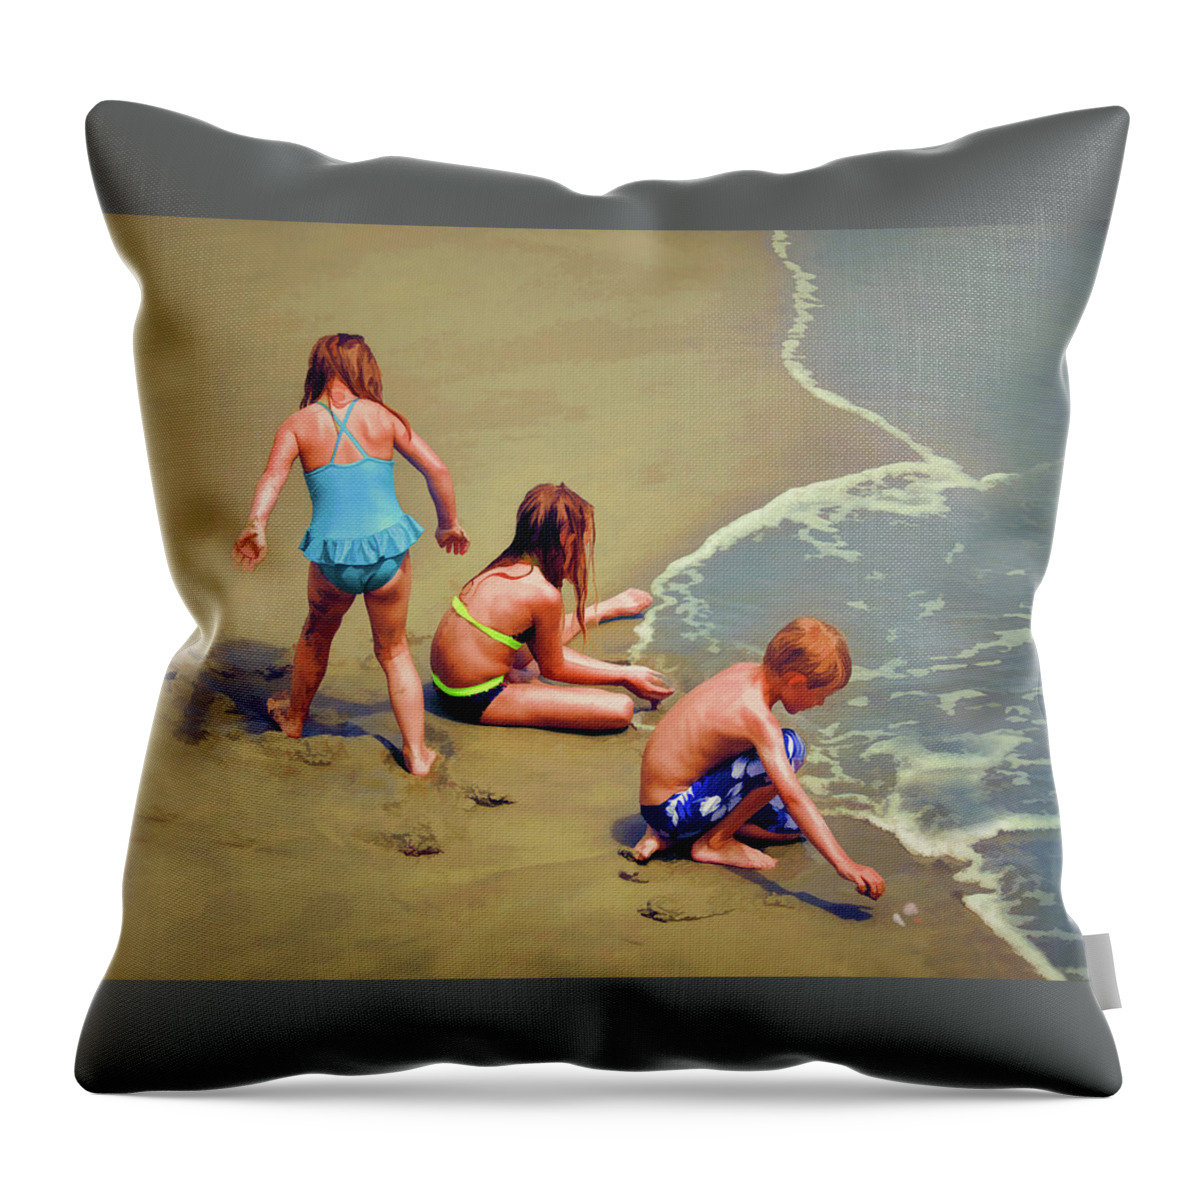 Childrens Shell Hunting At The Beach Throw Pillow featuring the photograph Childrens Shell Hunting At The Beach by Sandi OReilly